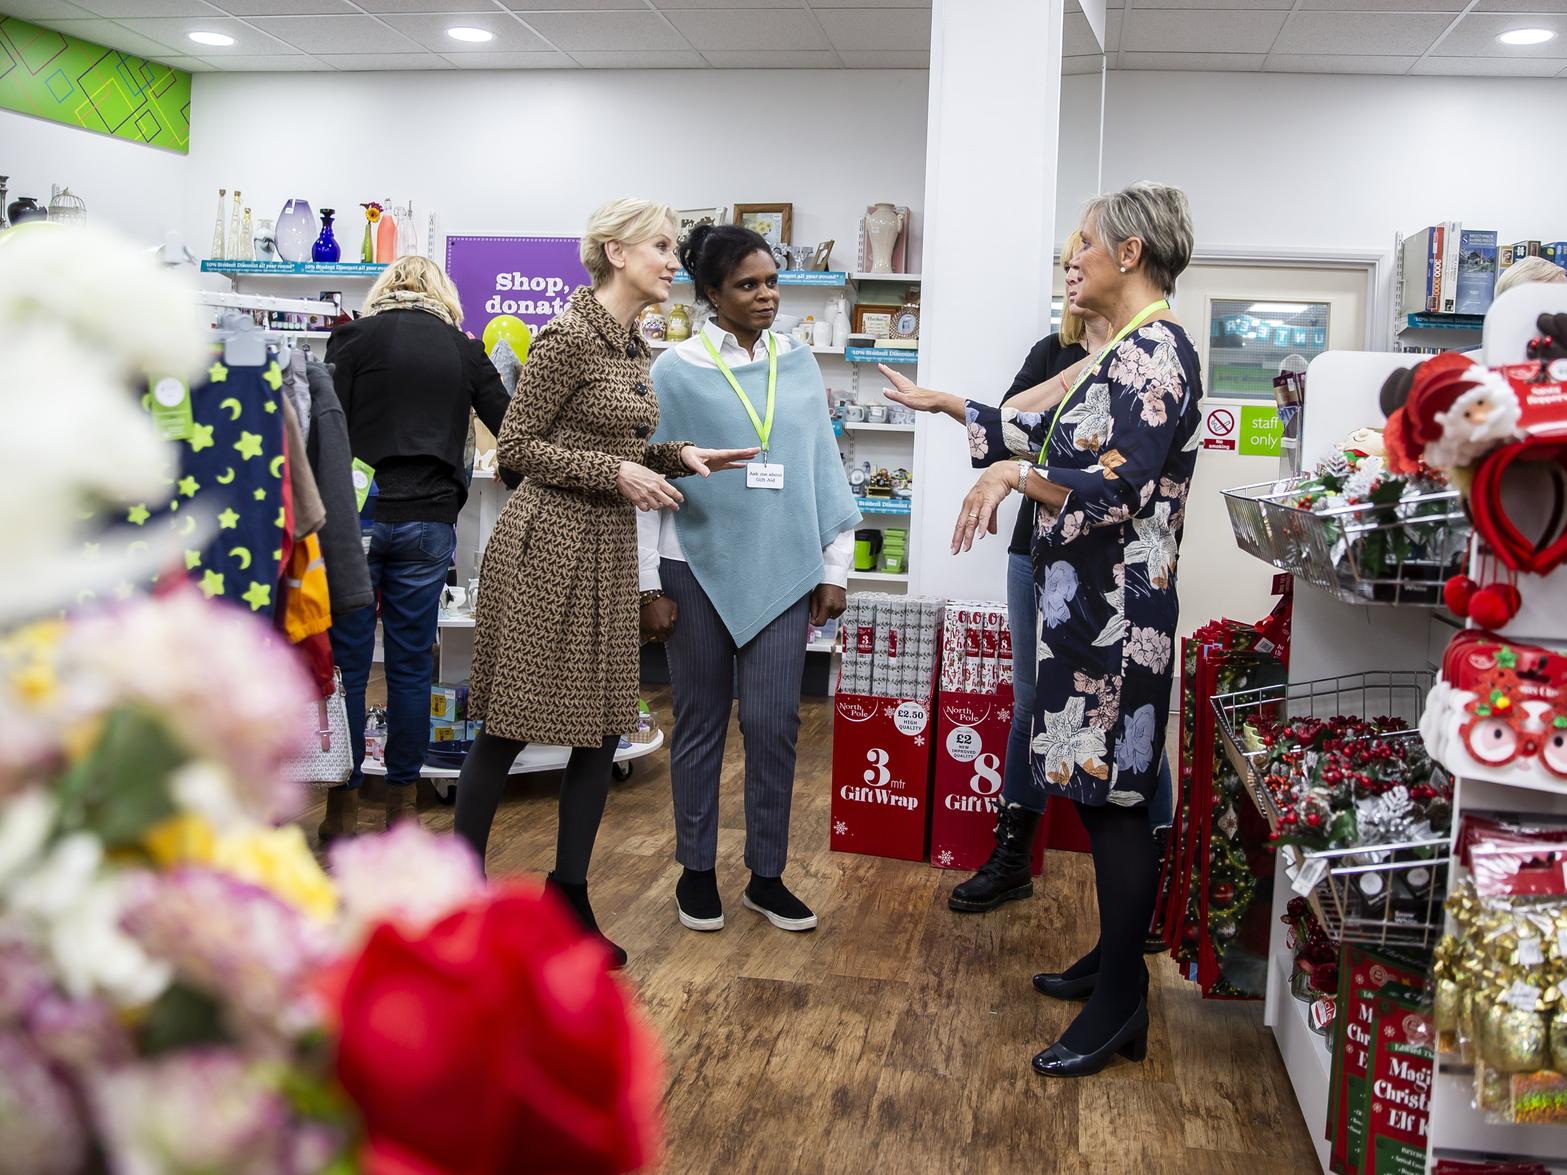 The Barnardos store is located at 51-53 in Abington Street. Pictures taken by Kirsty Edmonds.